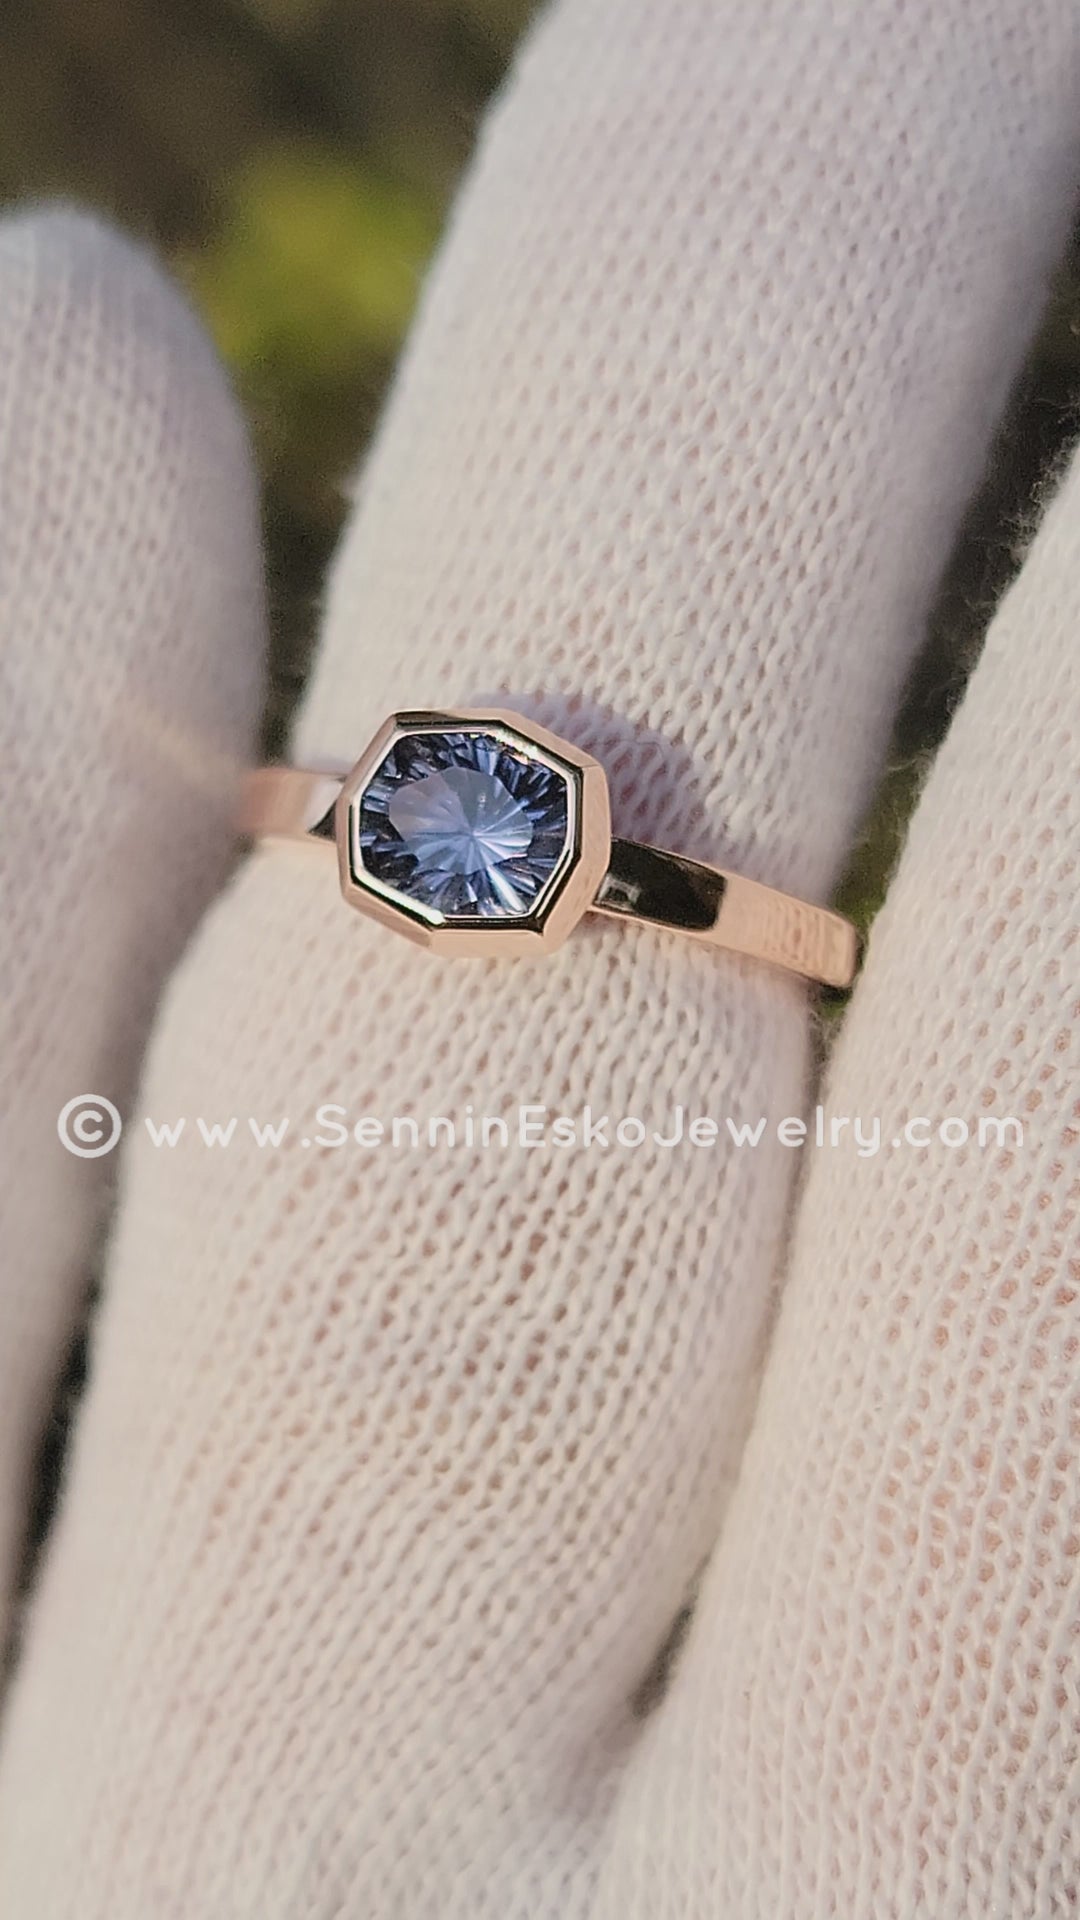 Medium Weight Solitaire Bezel Ring Setting - Fantasy Cut Umba Sapphire Depicted (Setting Only, Center Stone Sold Separately)